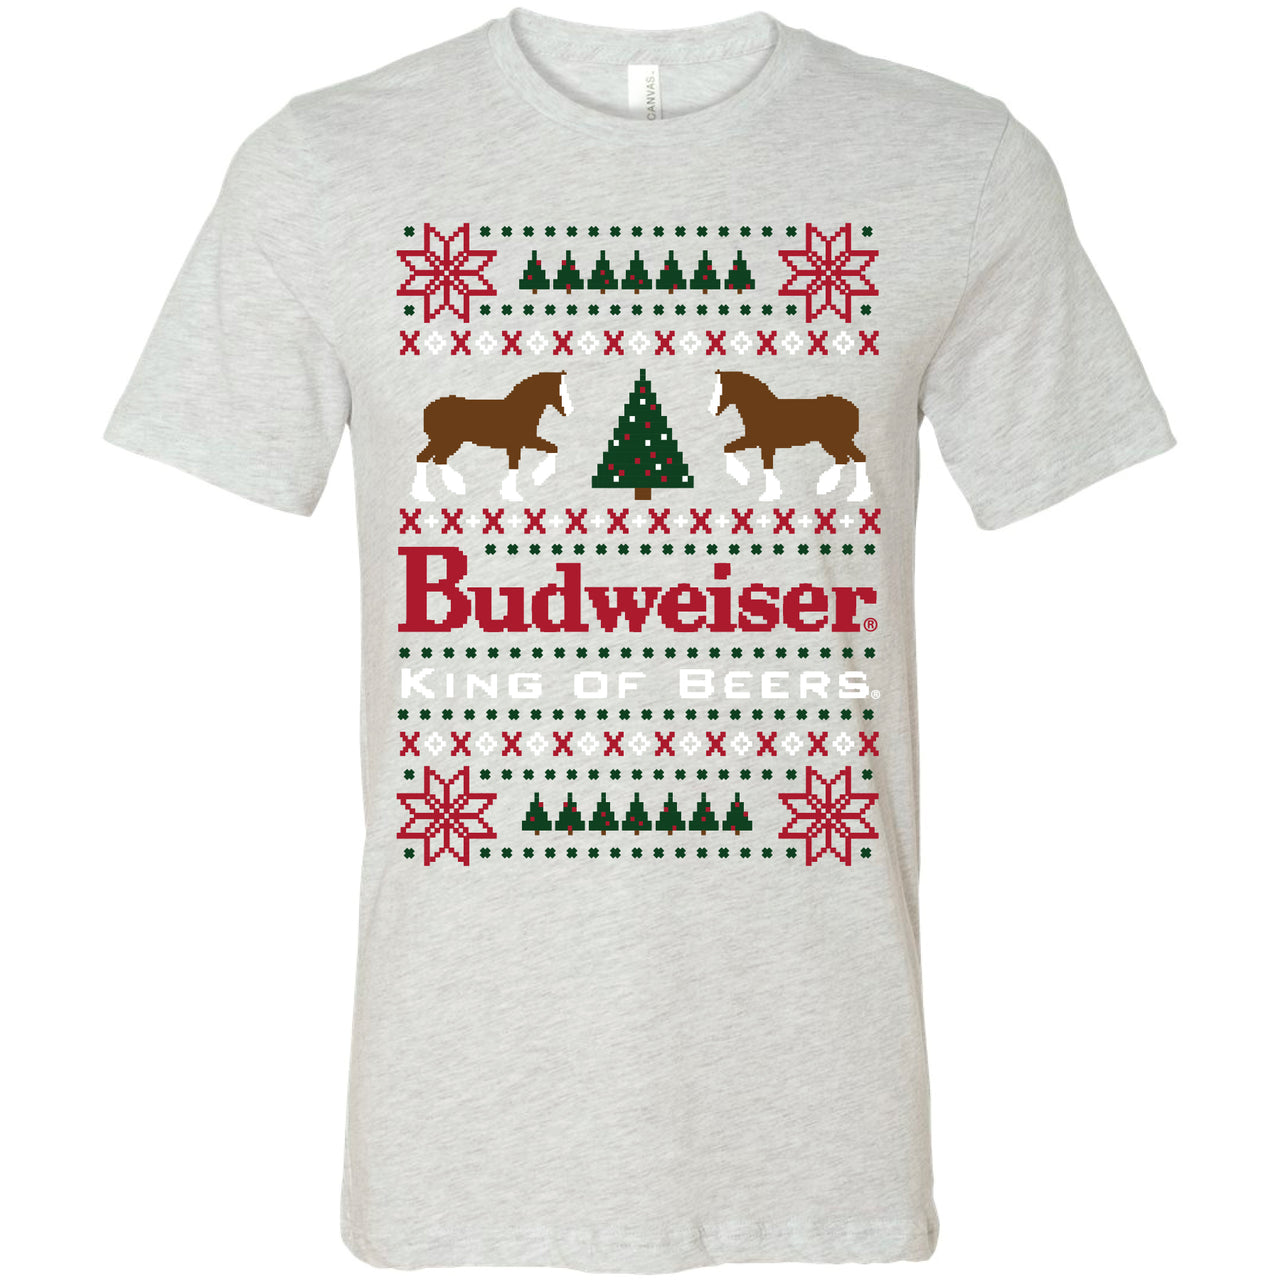 Budweiser Clydesdales Ugly Sweater T-Shirt